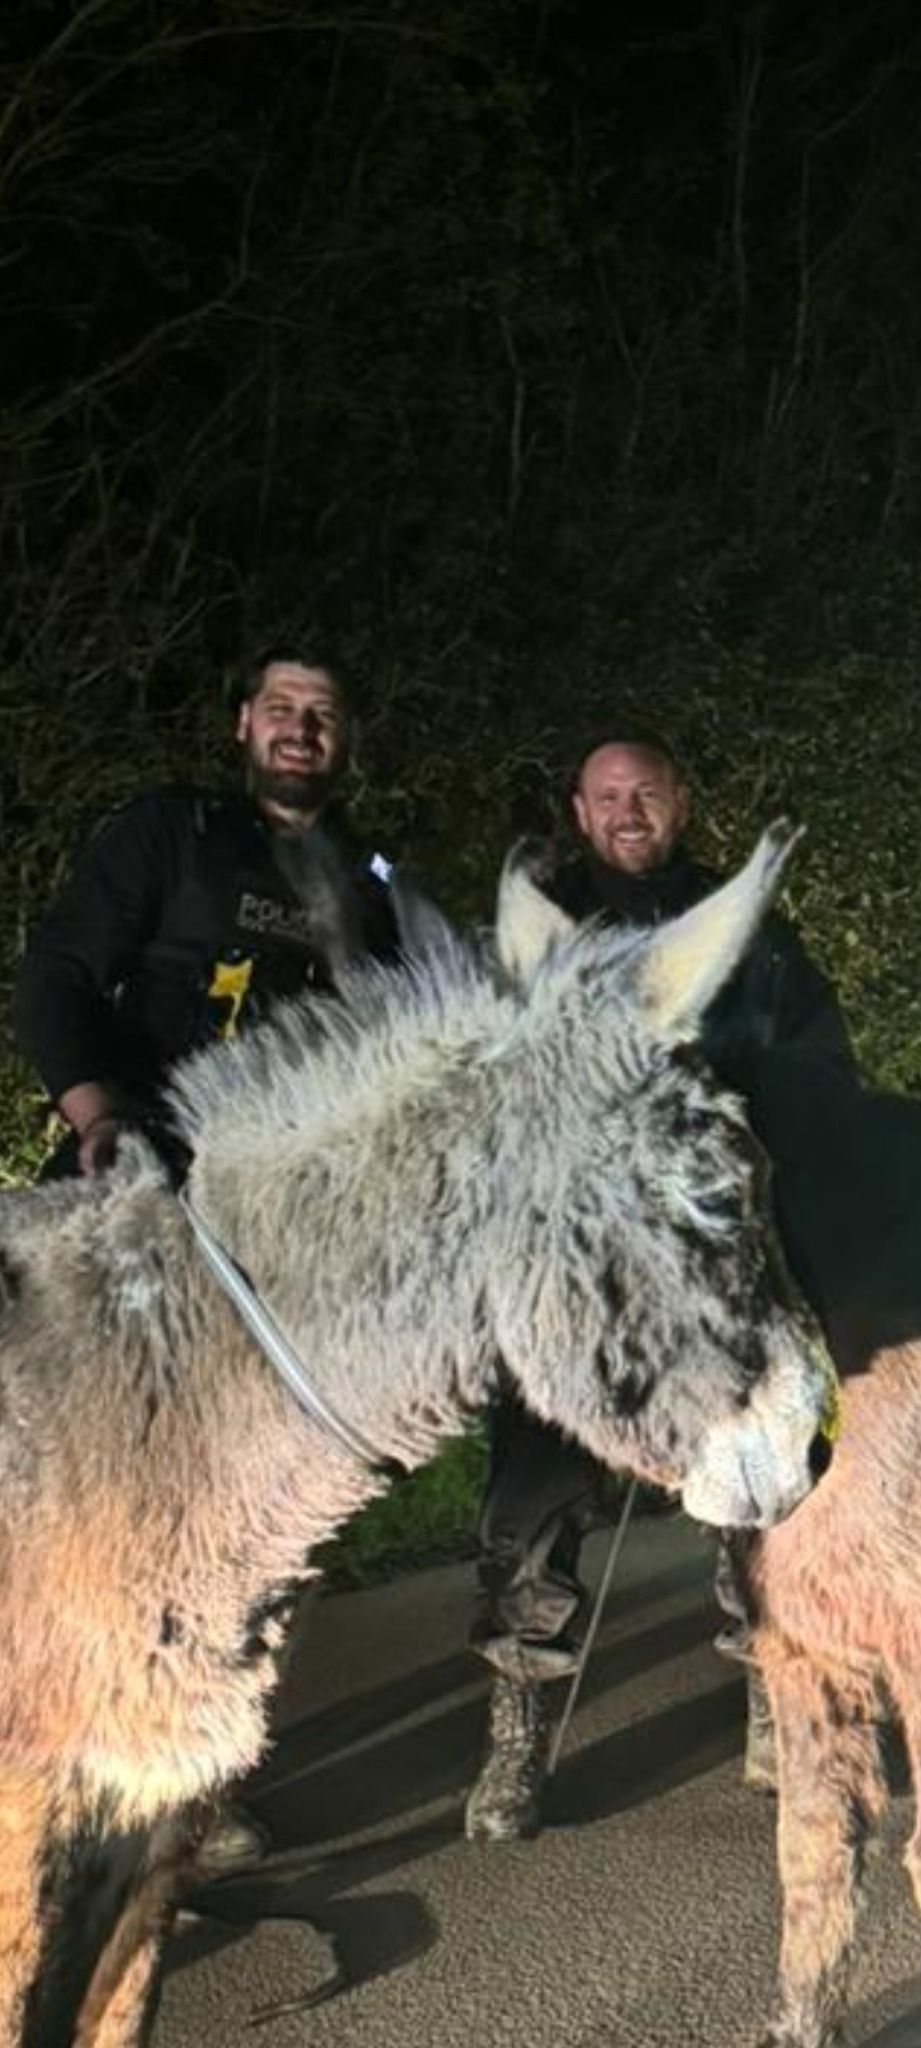 Two police officers with the donkeys